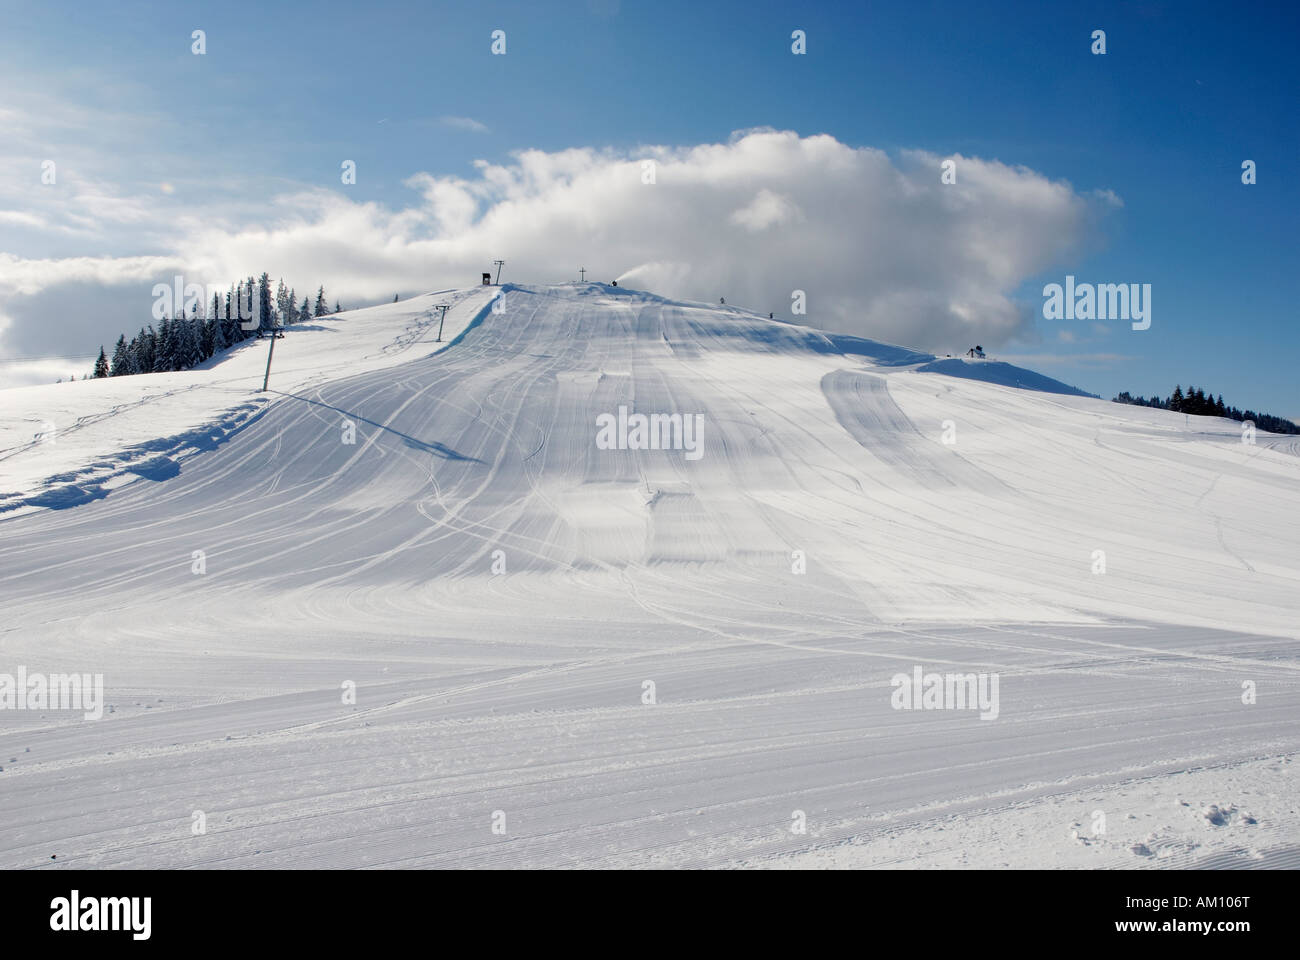 Skiing slope with snow machine in action, Austria Stock Photo